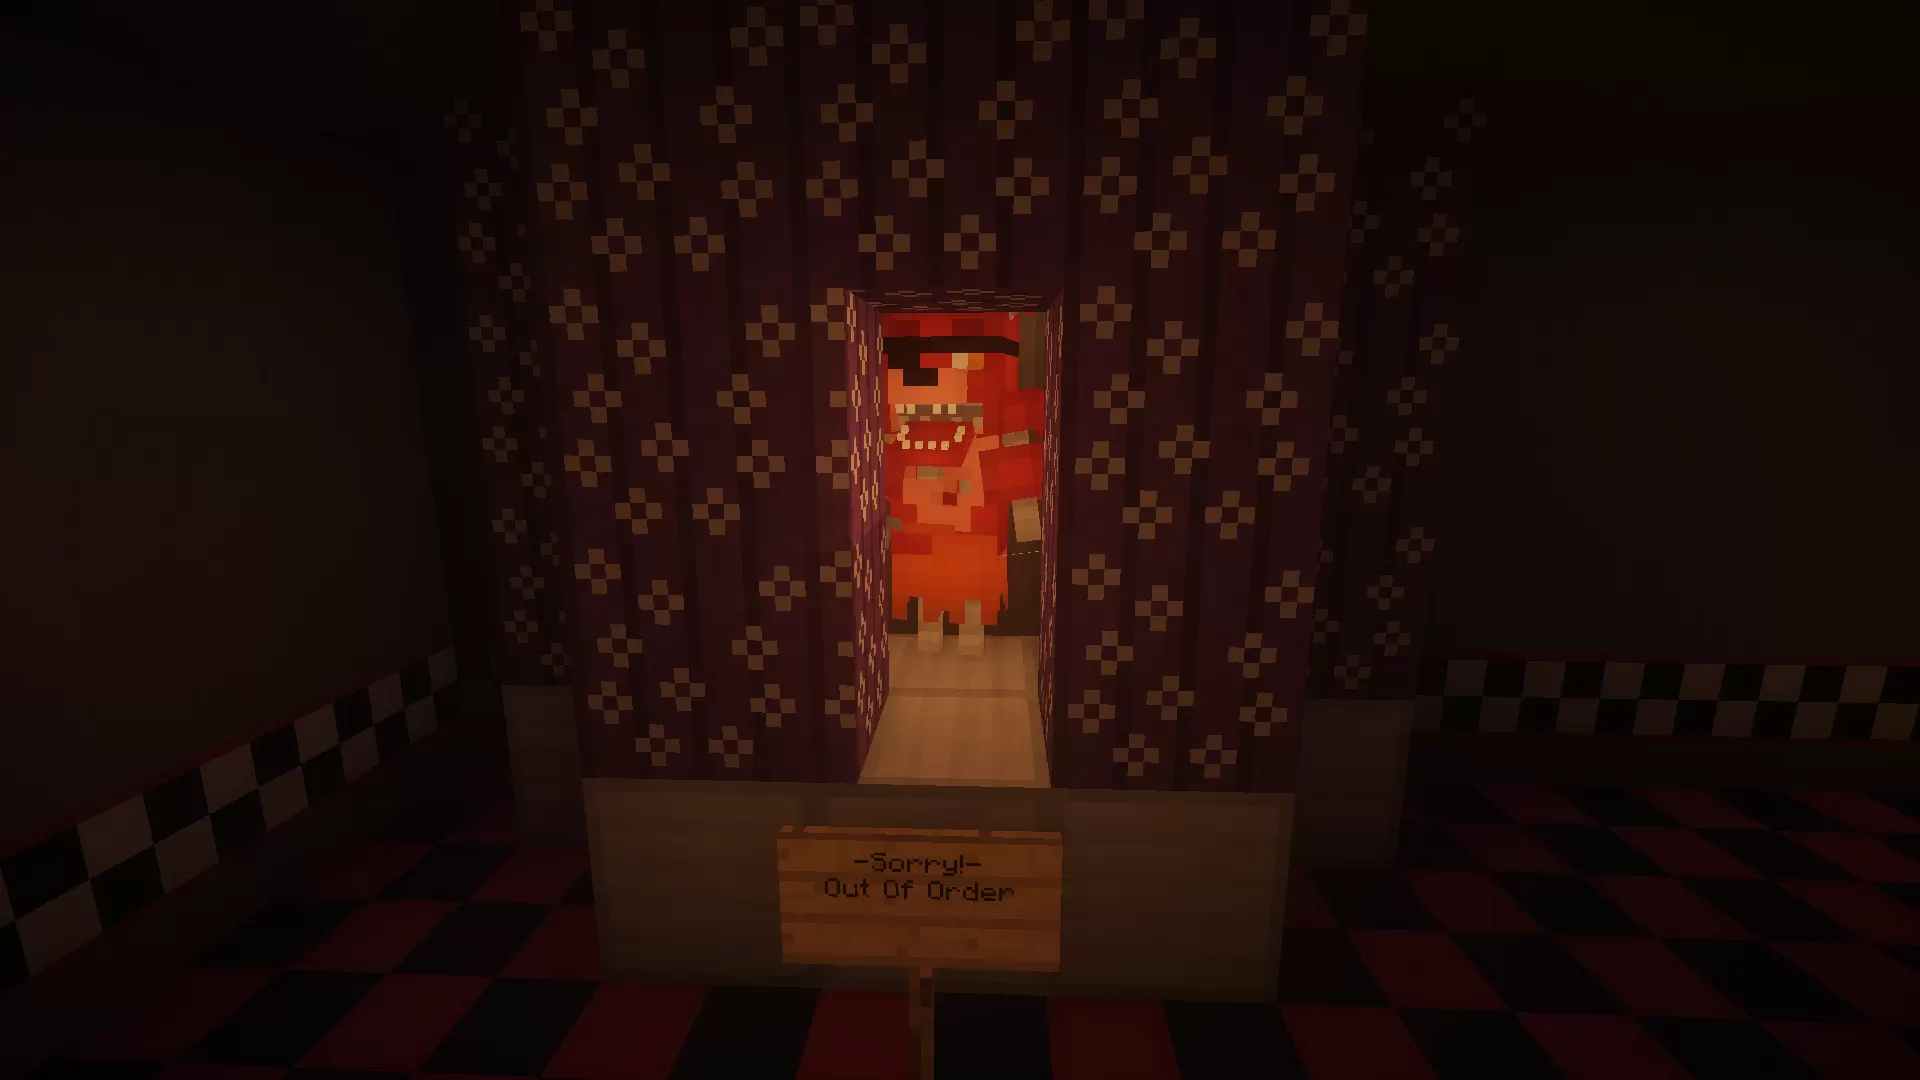 1.18] Five Nights at Freddy's Minecraft Map